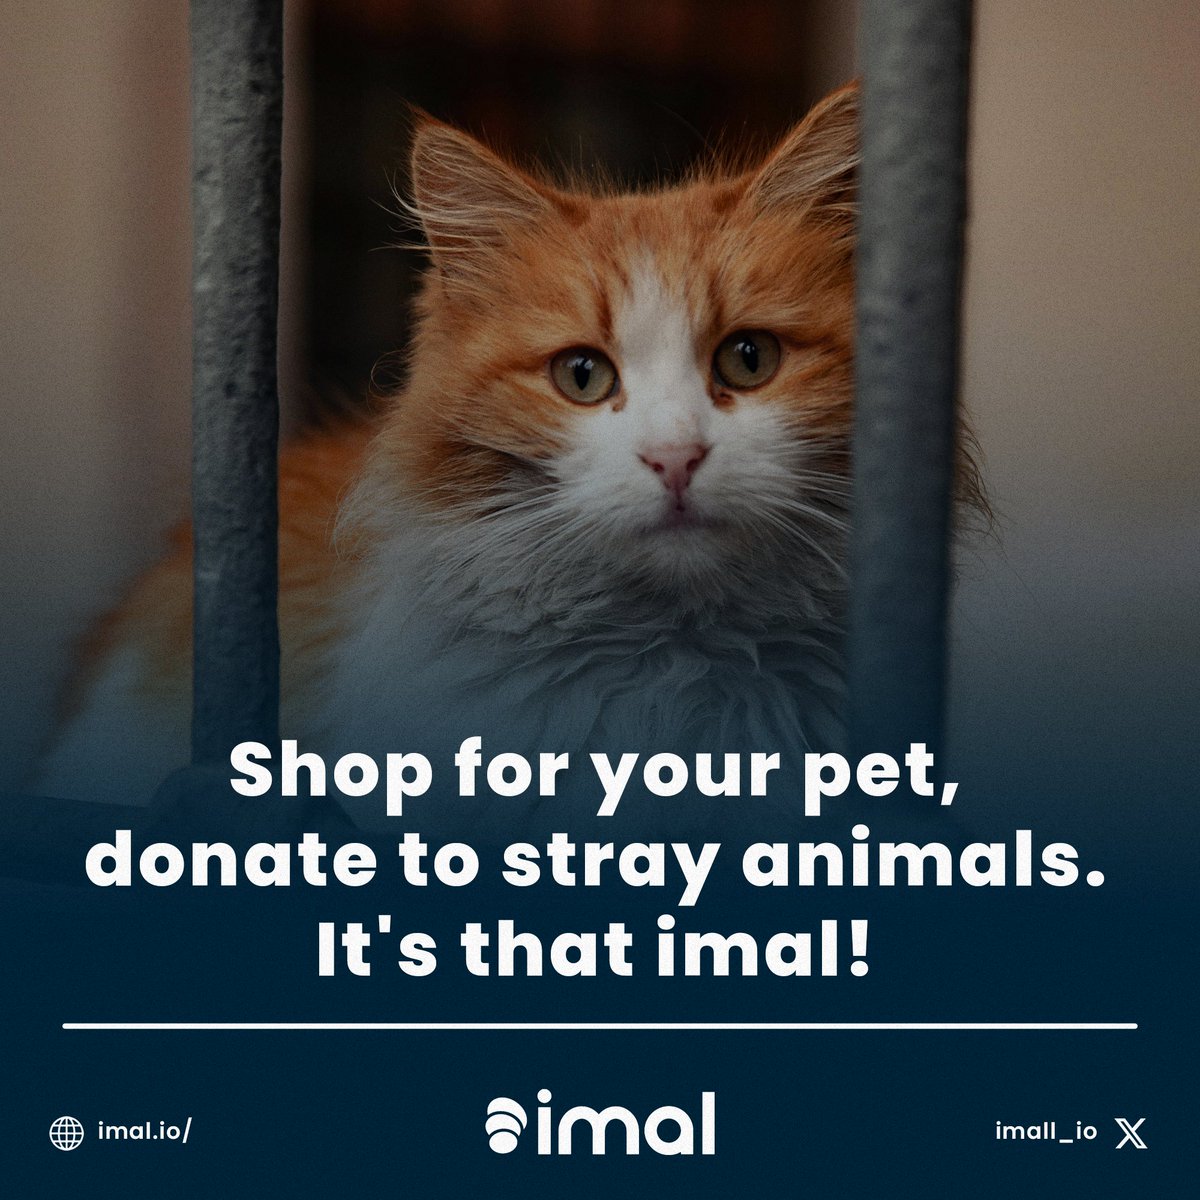 Treat your furry friend and help animals in need! Shop for your pet and donate to strays. “Make difference...” It’s imal 🙌🏻 #imal #makeadifference #compassion